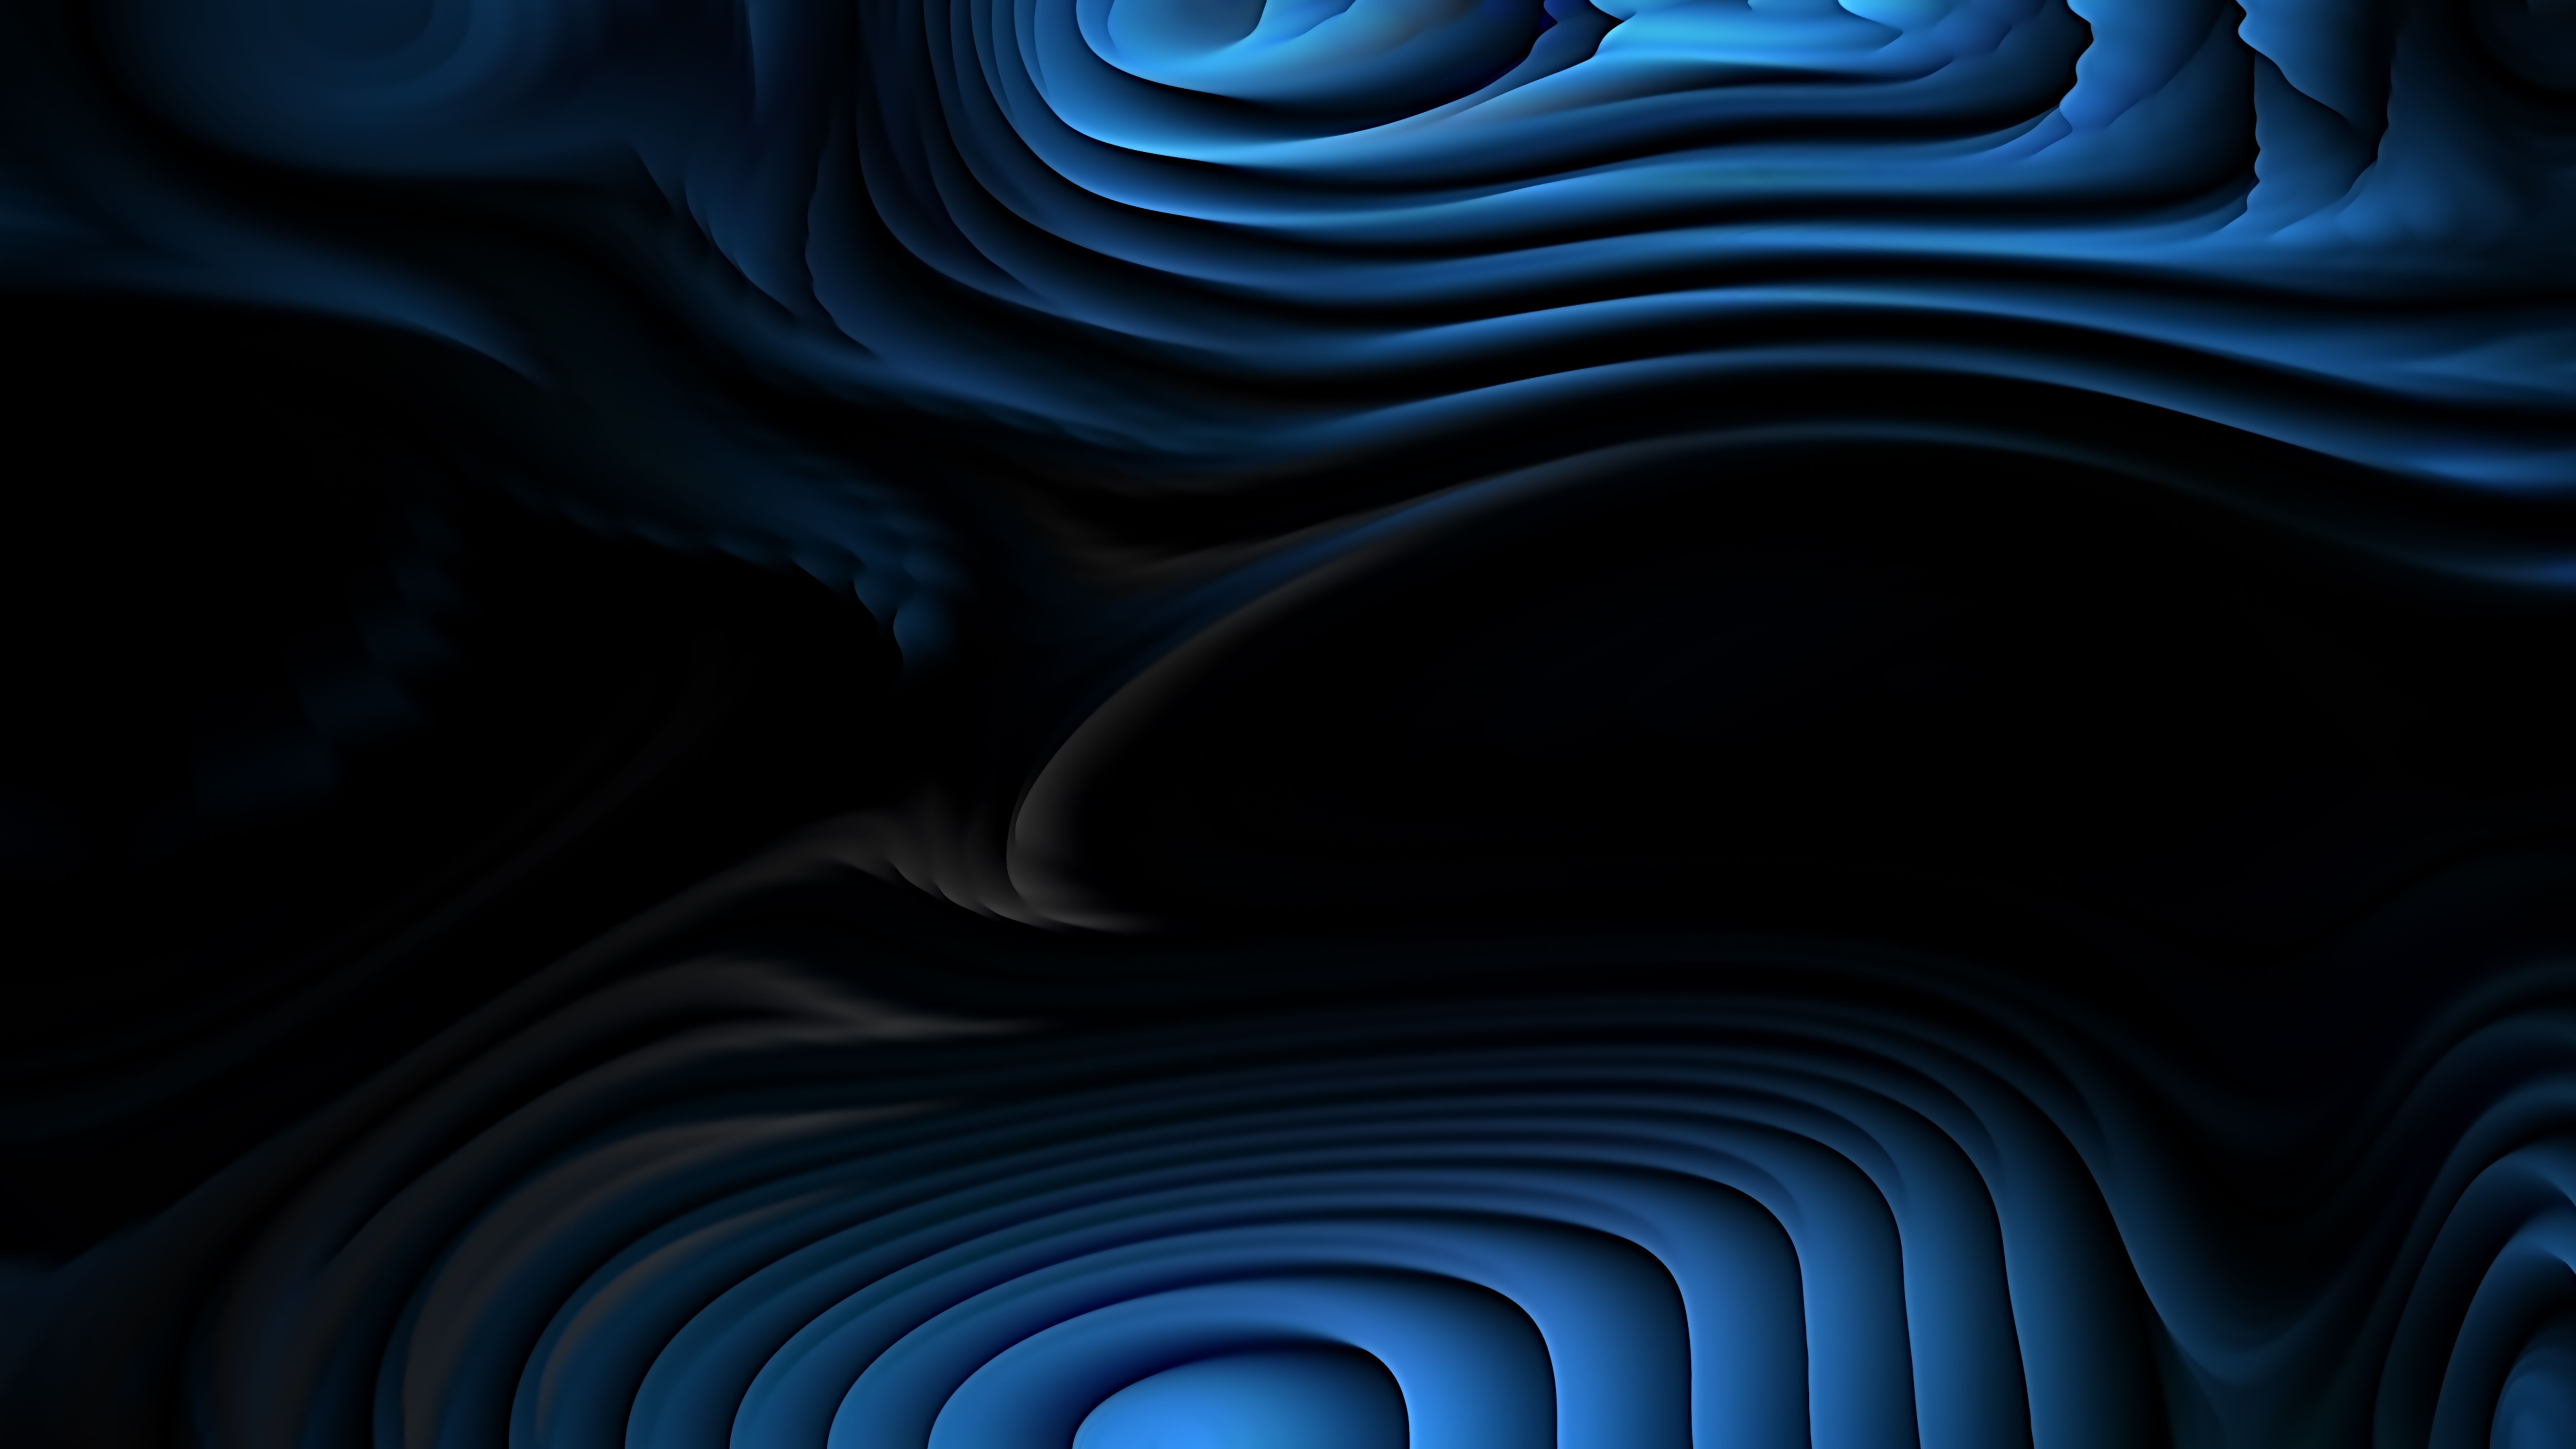 Abstract 3D Black and Blue Curved Lines Ripple background